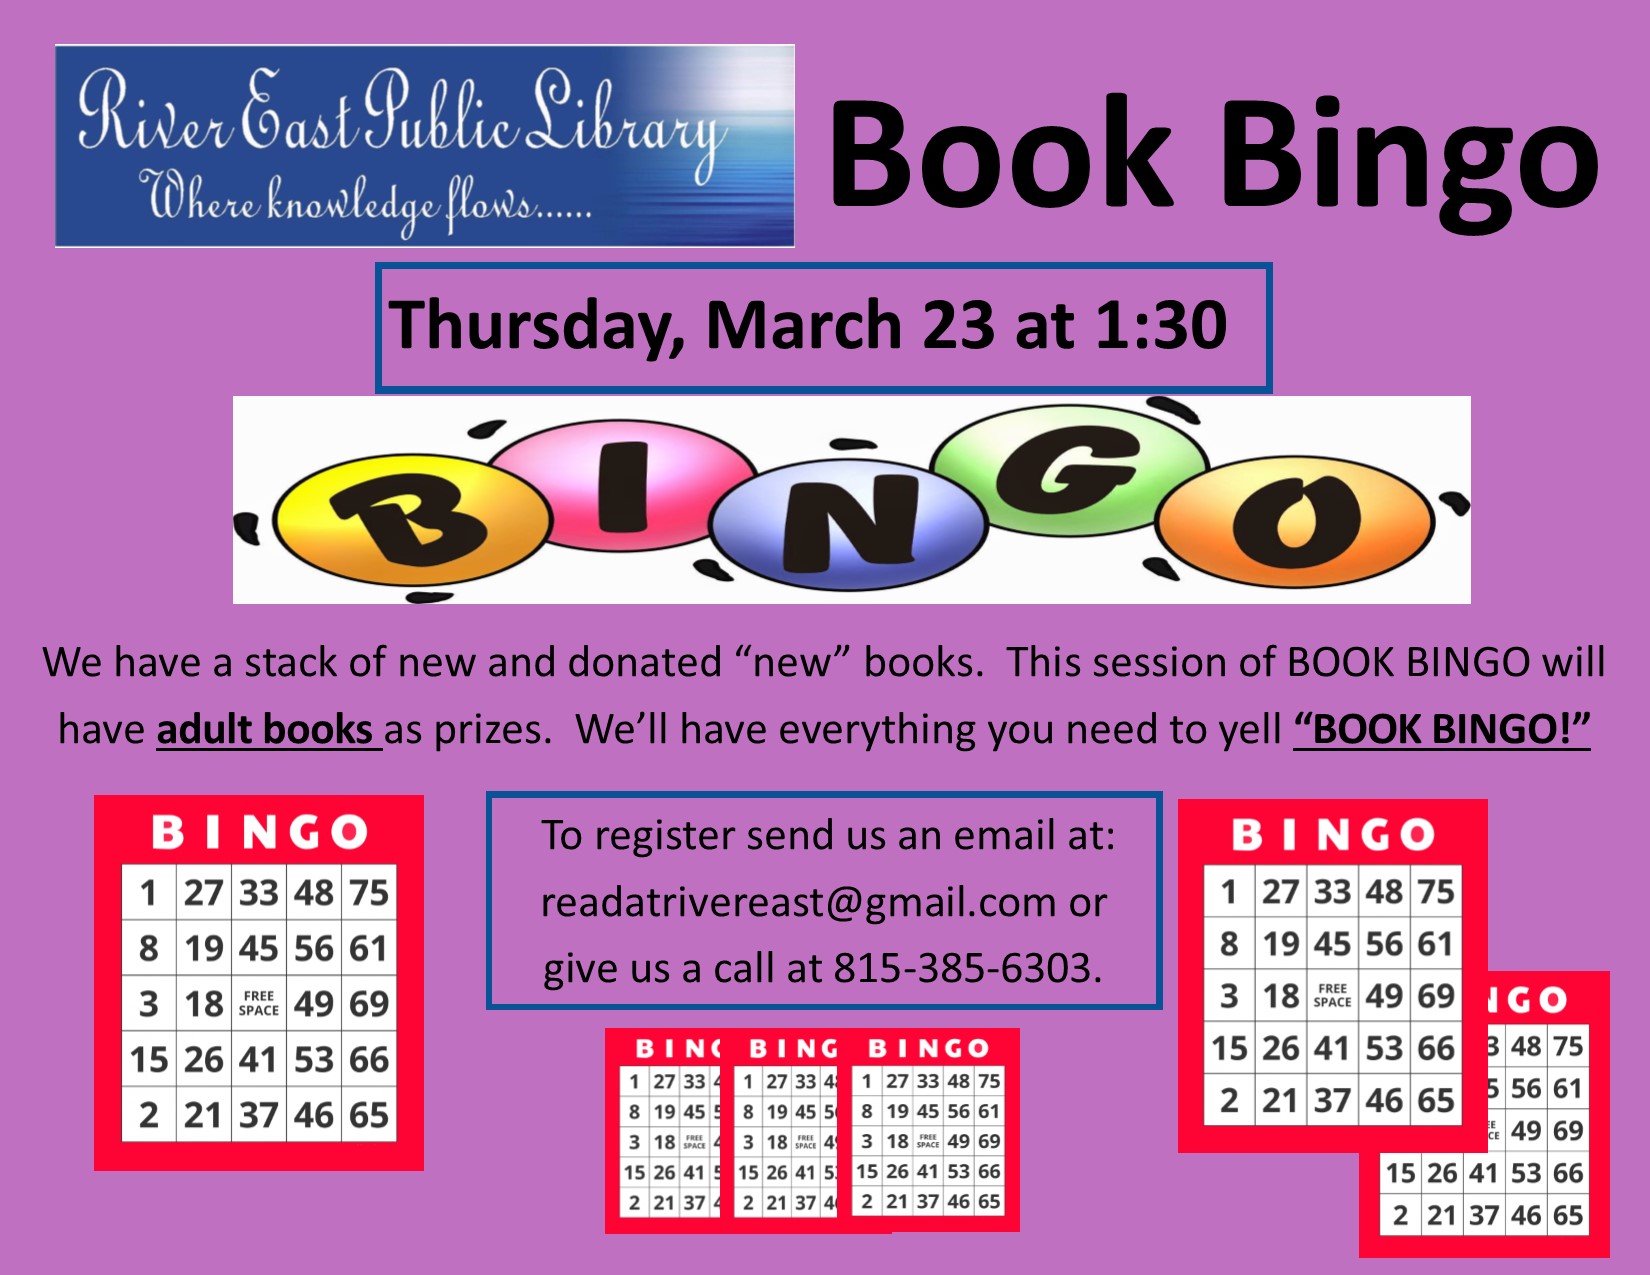 Poster advertising our upcoming book bingo